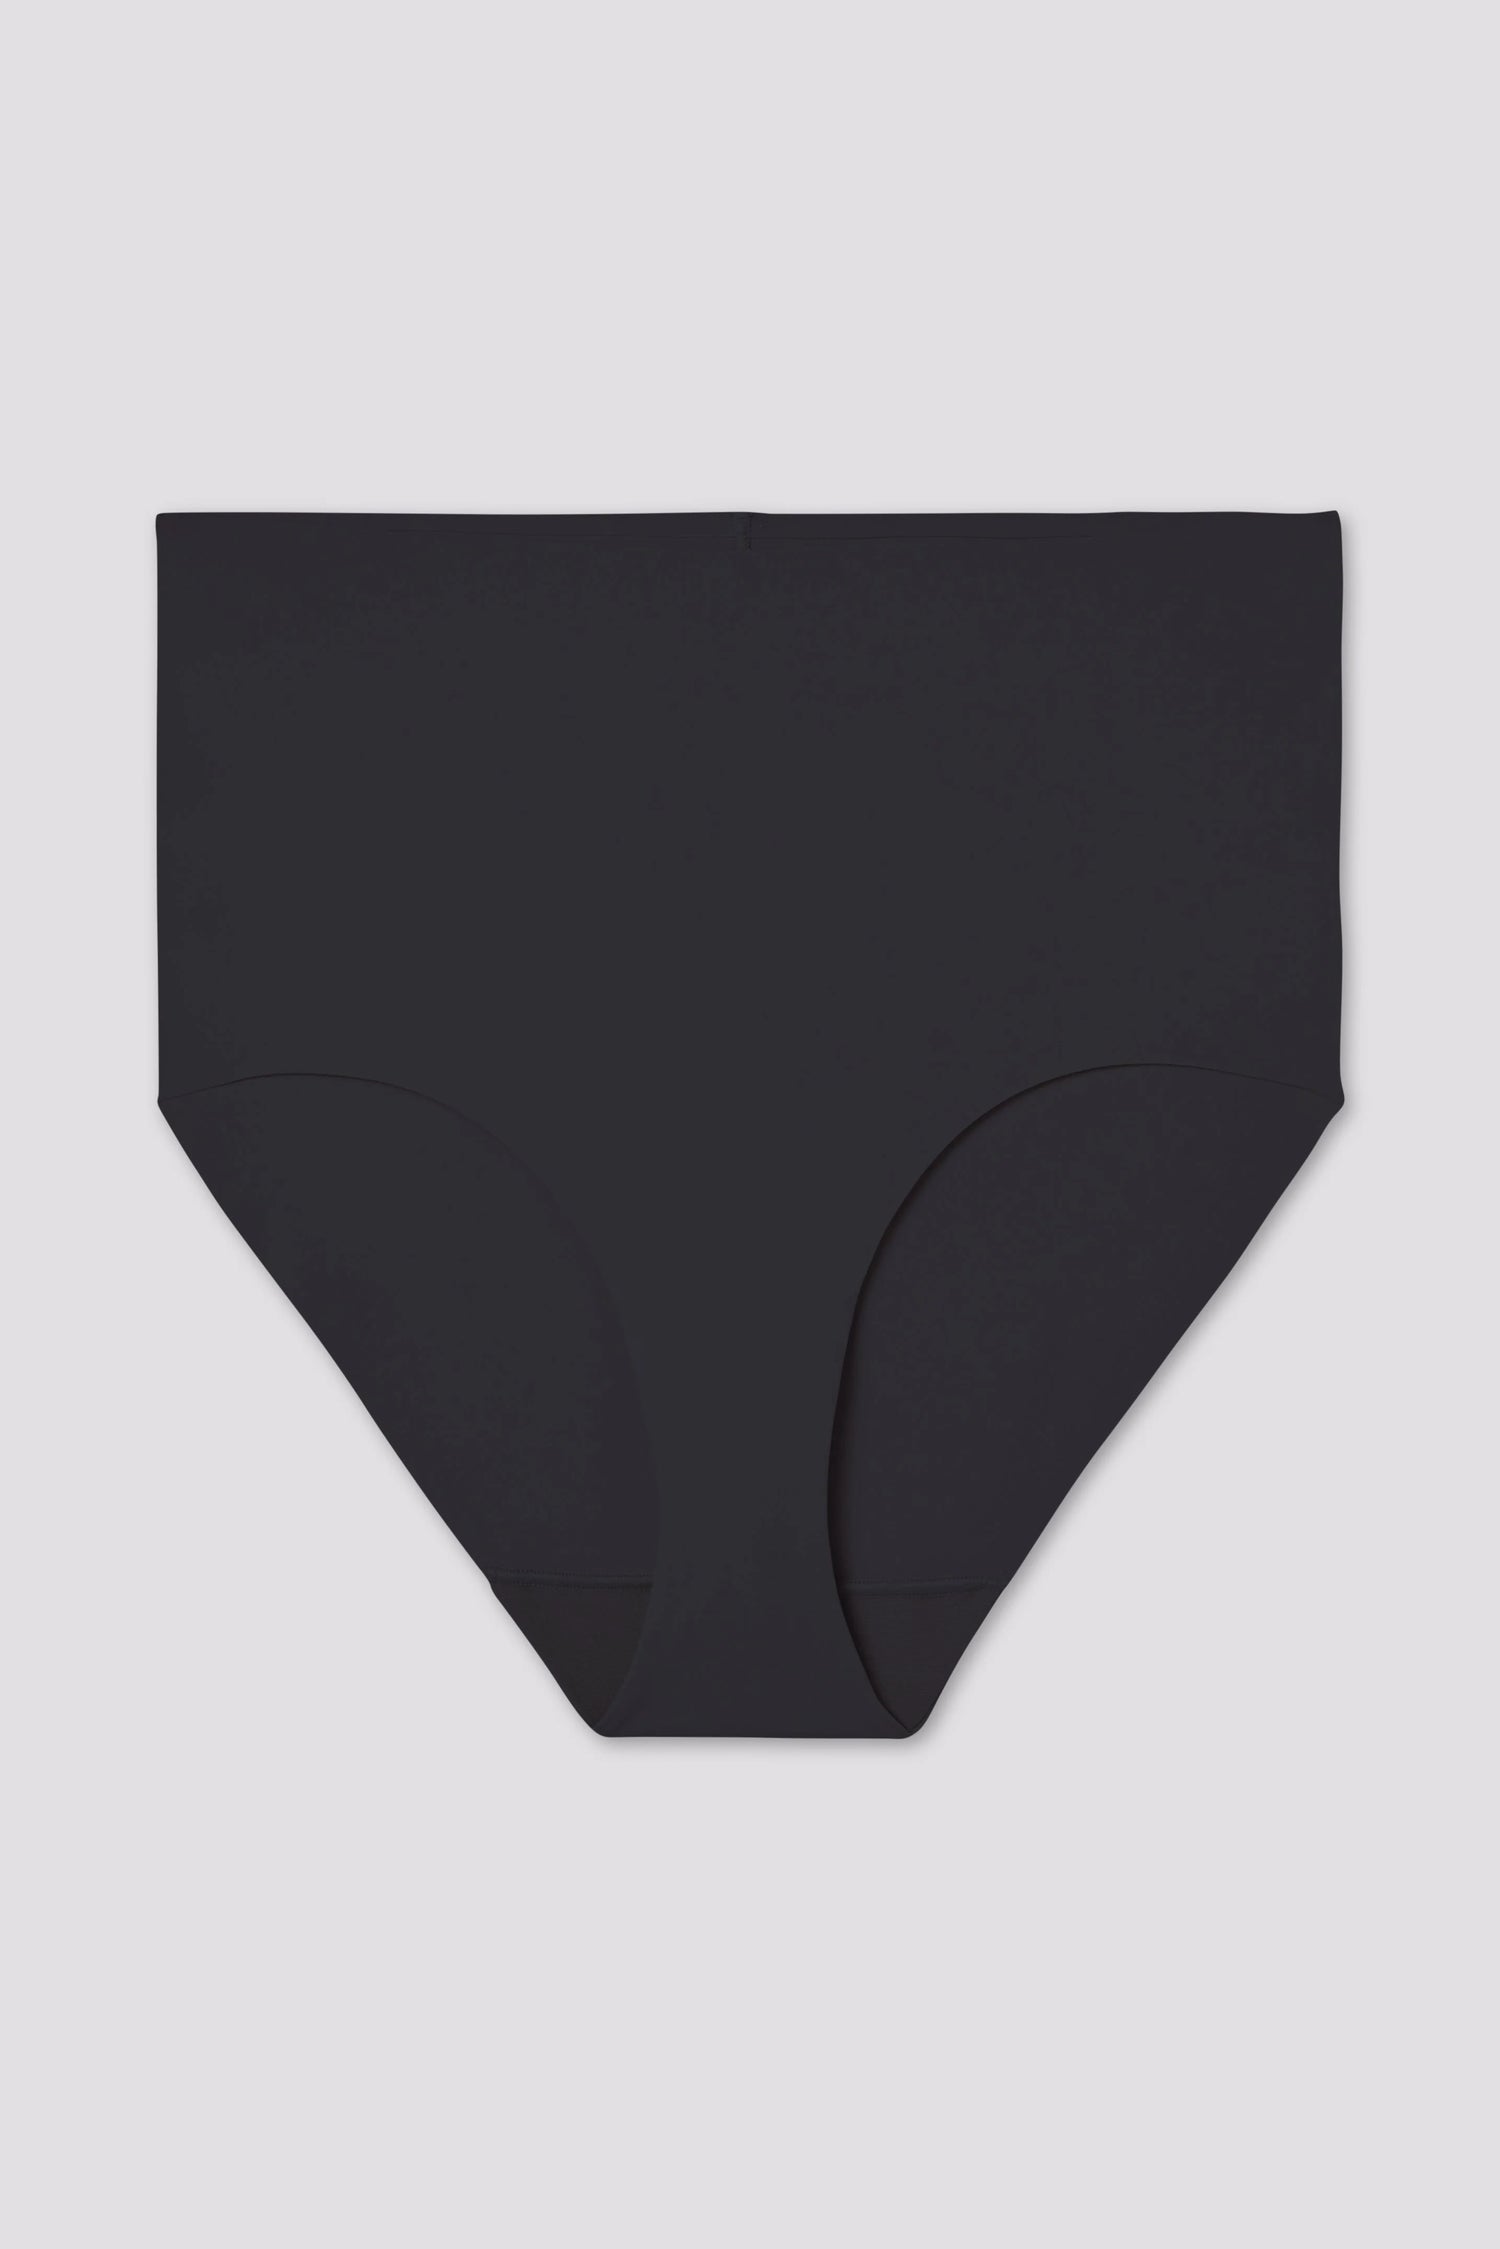 Girlfriend Collective High-Rise Brief in Raven